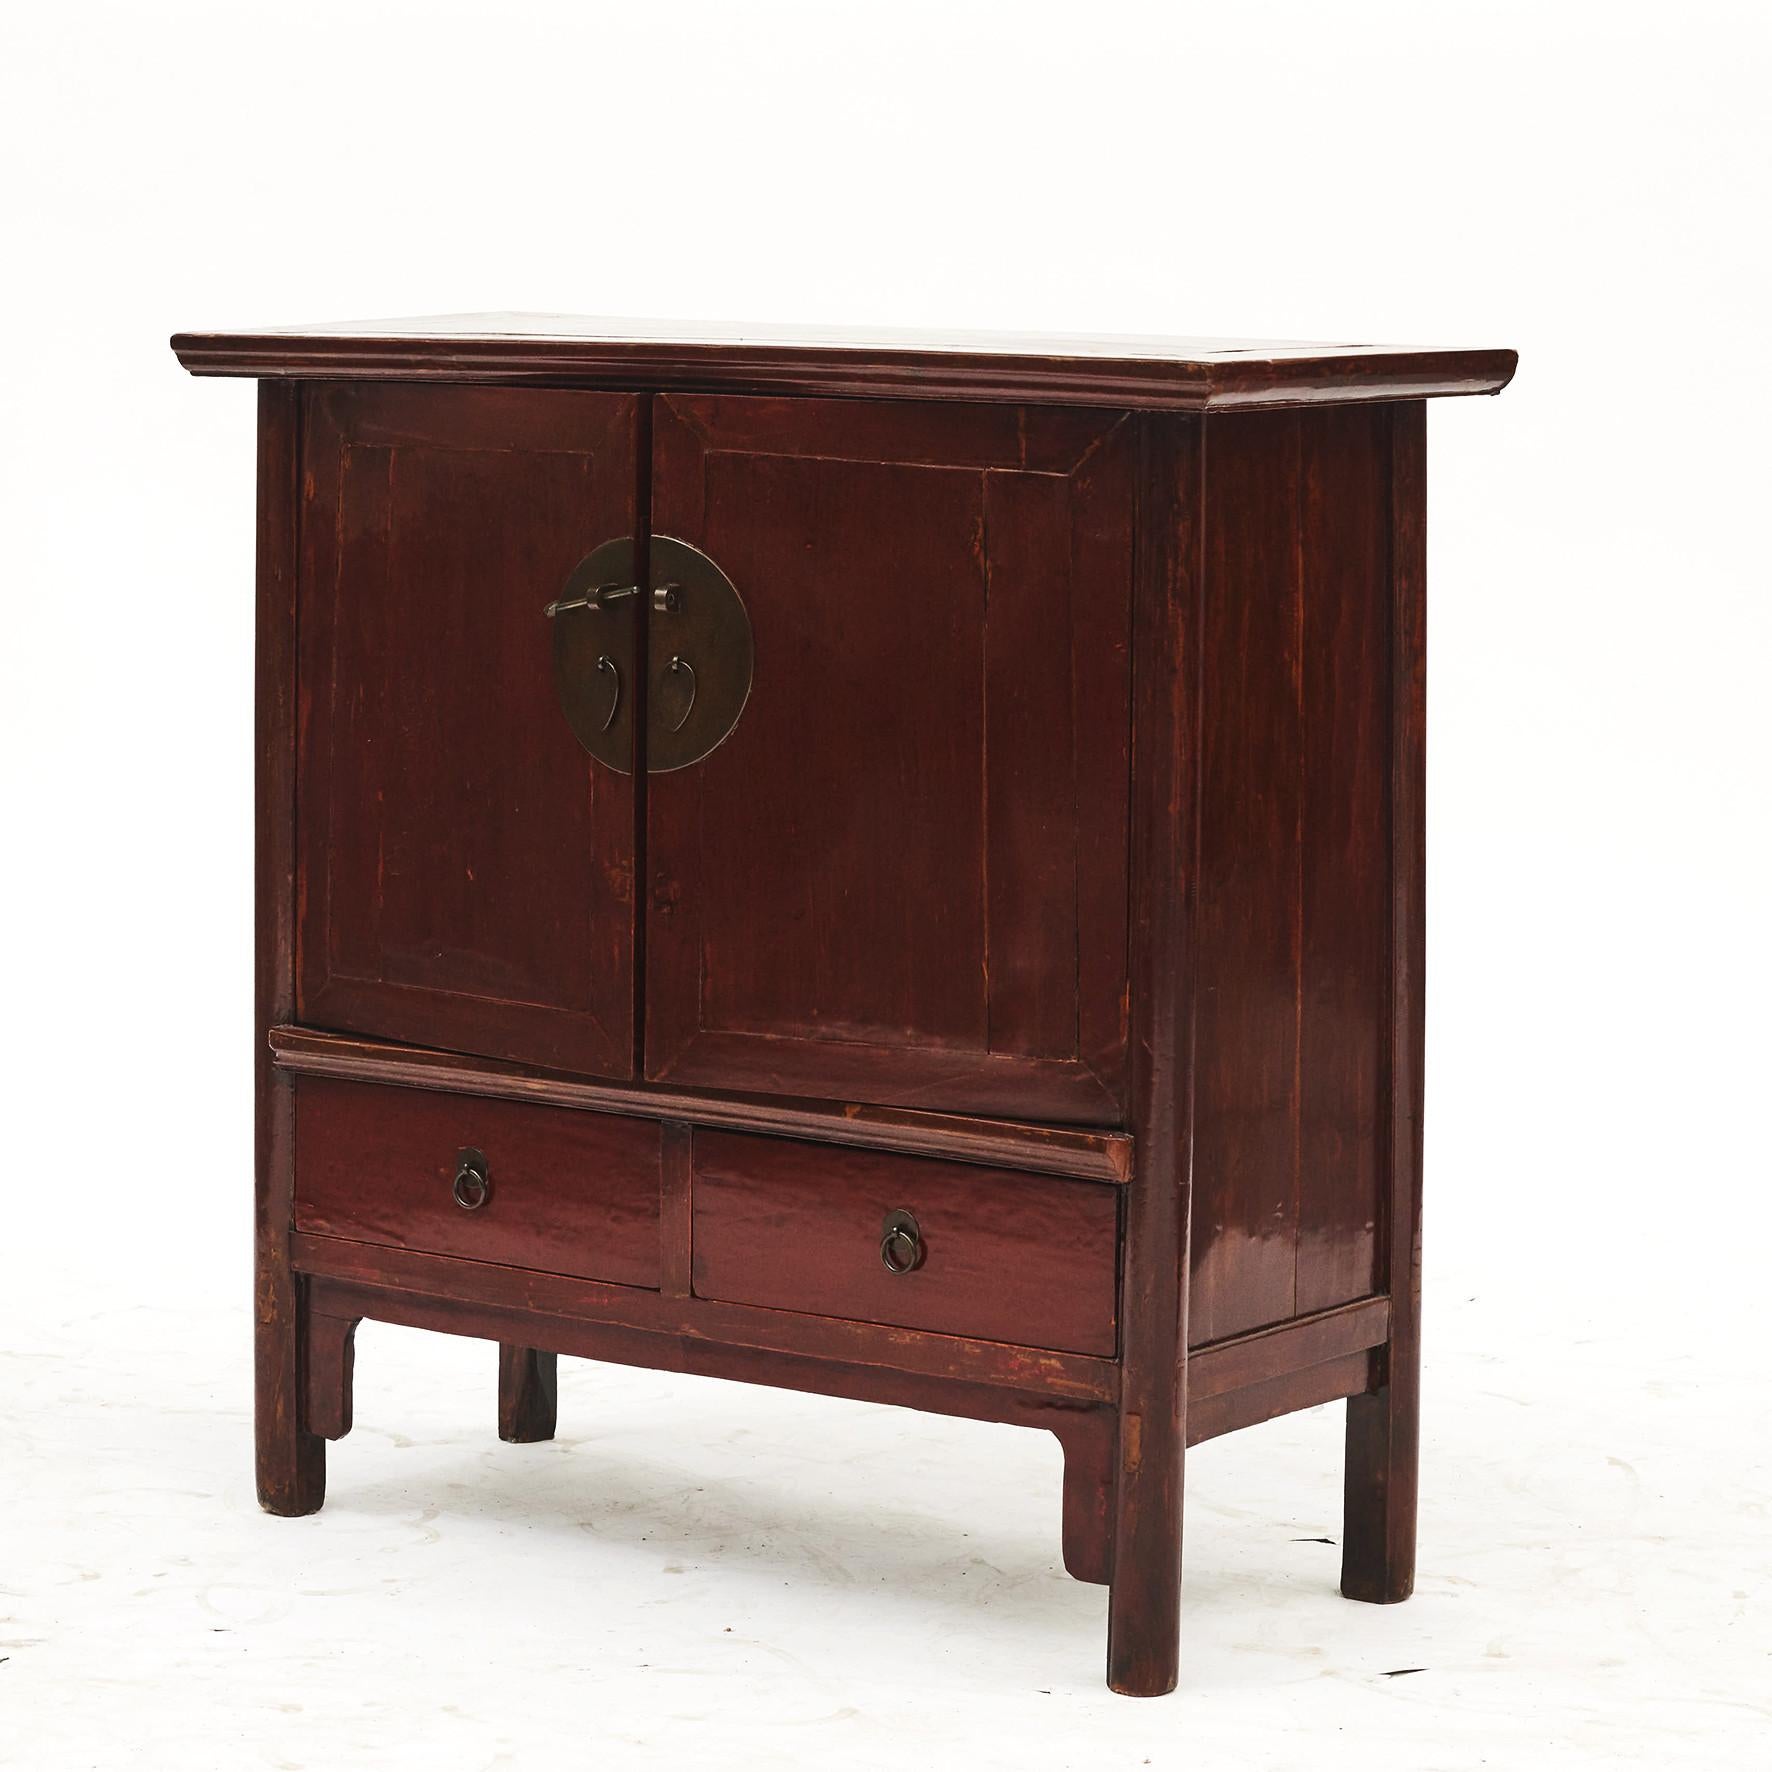 Chinese cabinet in original red lacquer with two drawers over double door.
This Qing cabinet has a lovely natural aged patina with a lacquered finish giving the paint incredible depth.
From Shanxi Province, China, 1840-1860.